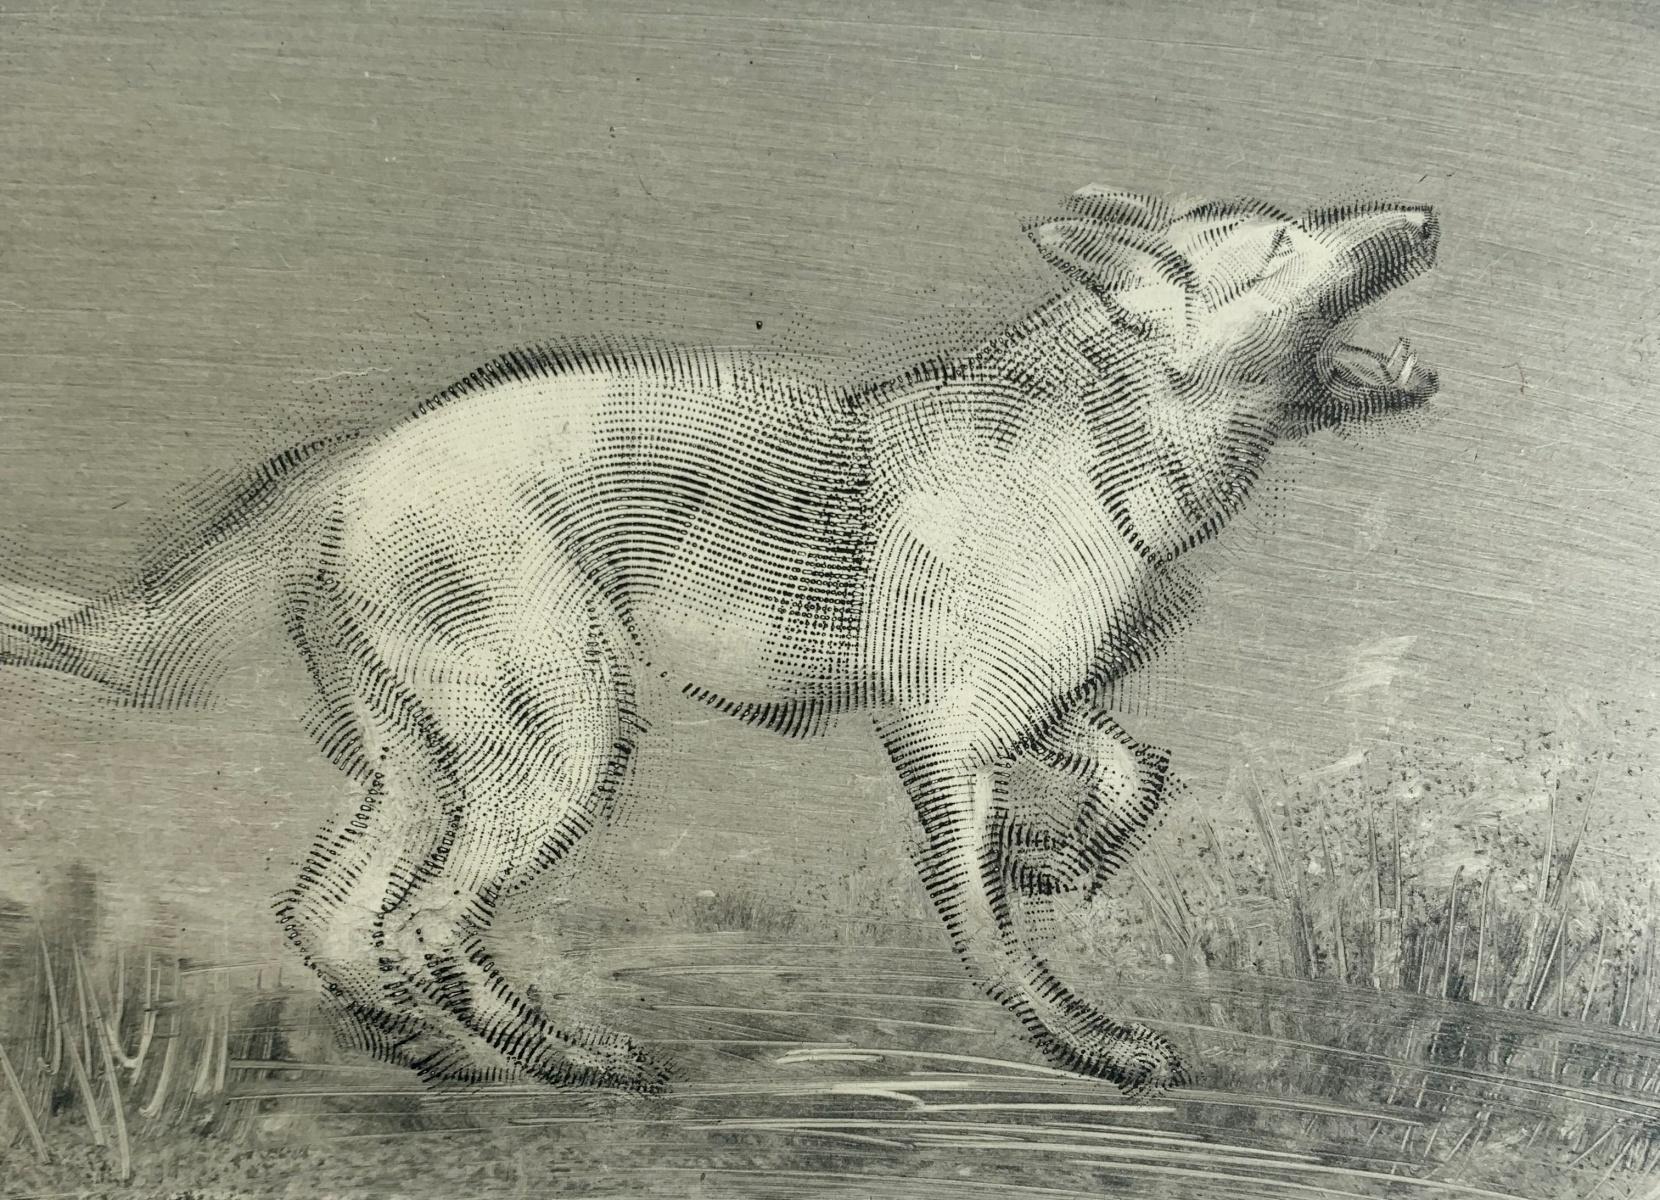 Contemporary figurative etching print by Polish arist living in Canada, Pawel Zablocki. Print depicts dog Tofcia in dynamic poses viewed from the side. Artist's unique technique of printmaking creates interesting effect of visual texture. 

PAWEL